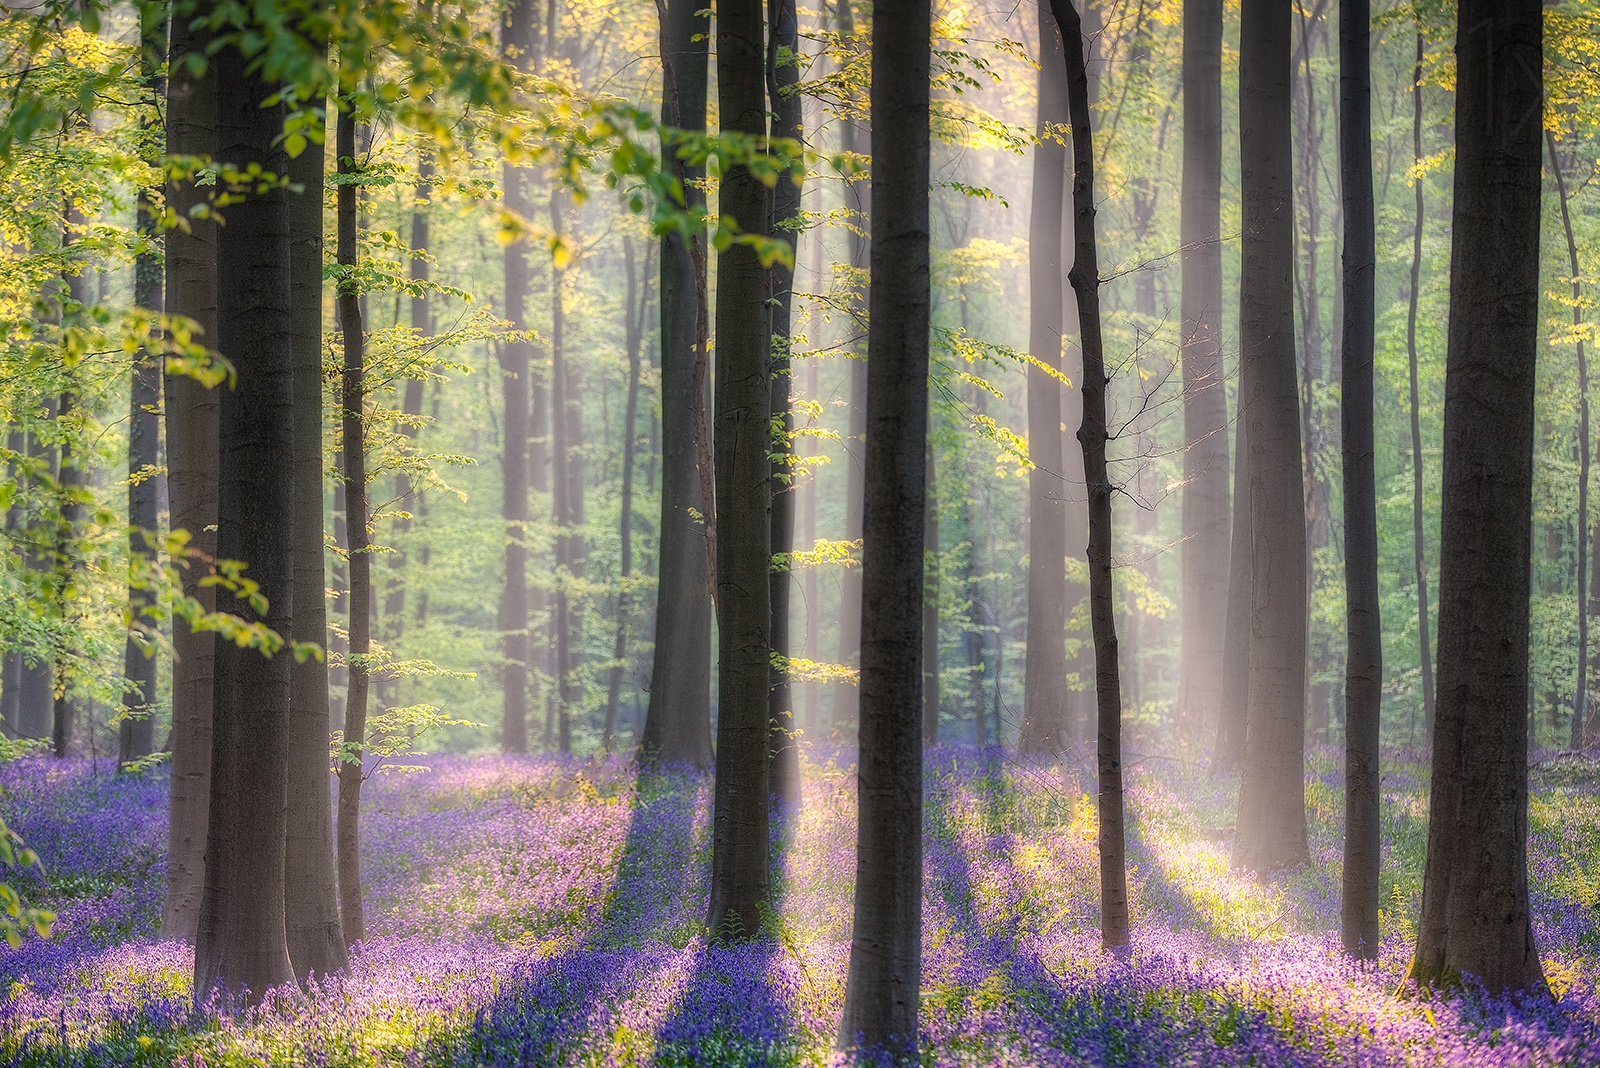 16 Stunning Photos Of The Blue Forest In Belgium That Is Completely